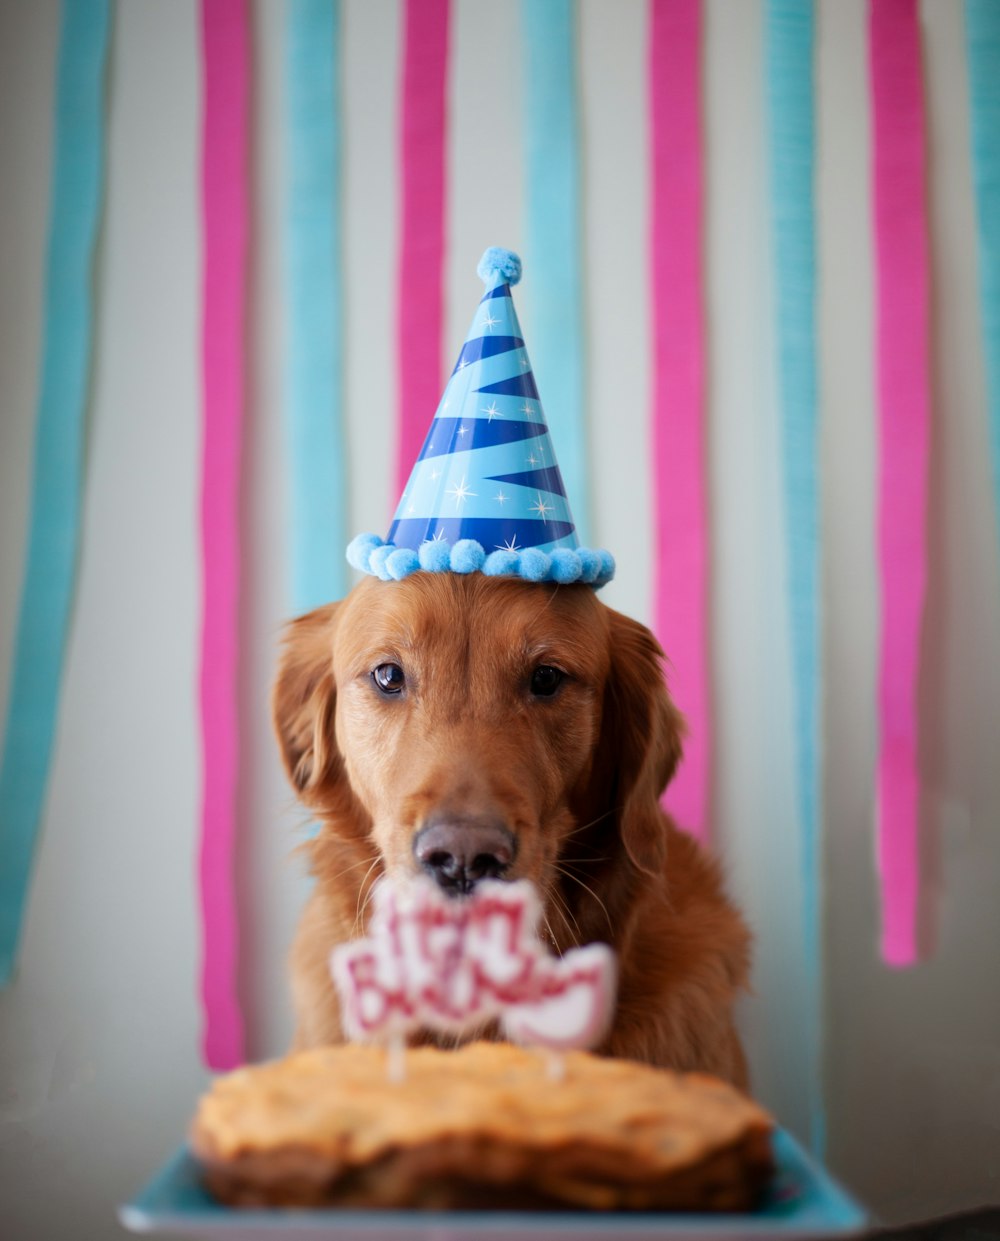 brown short coated dog wearing blue and white striped hat